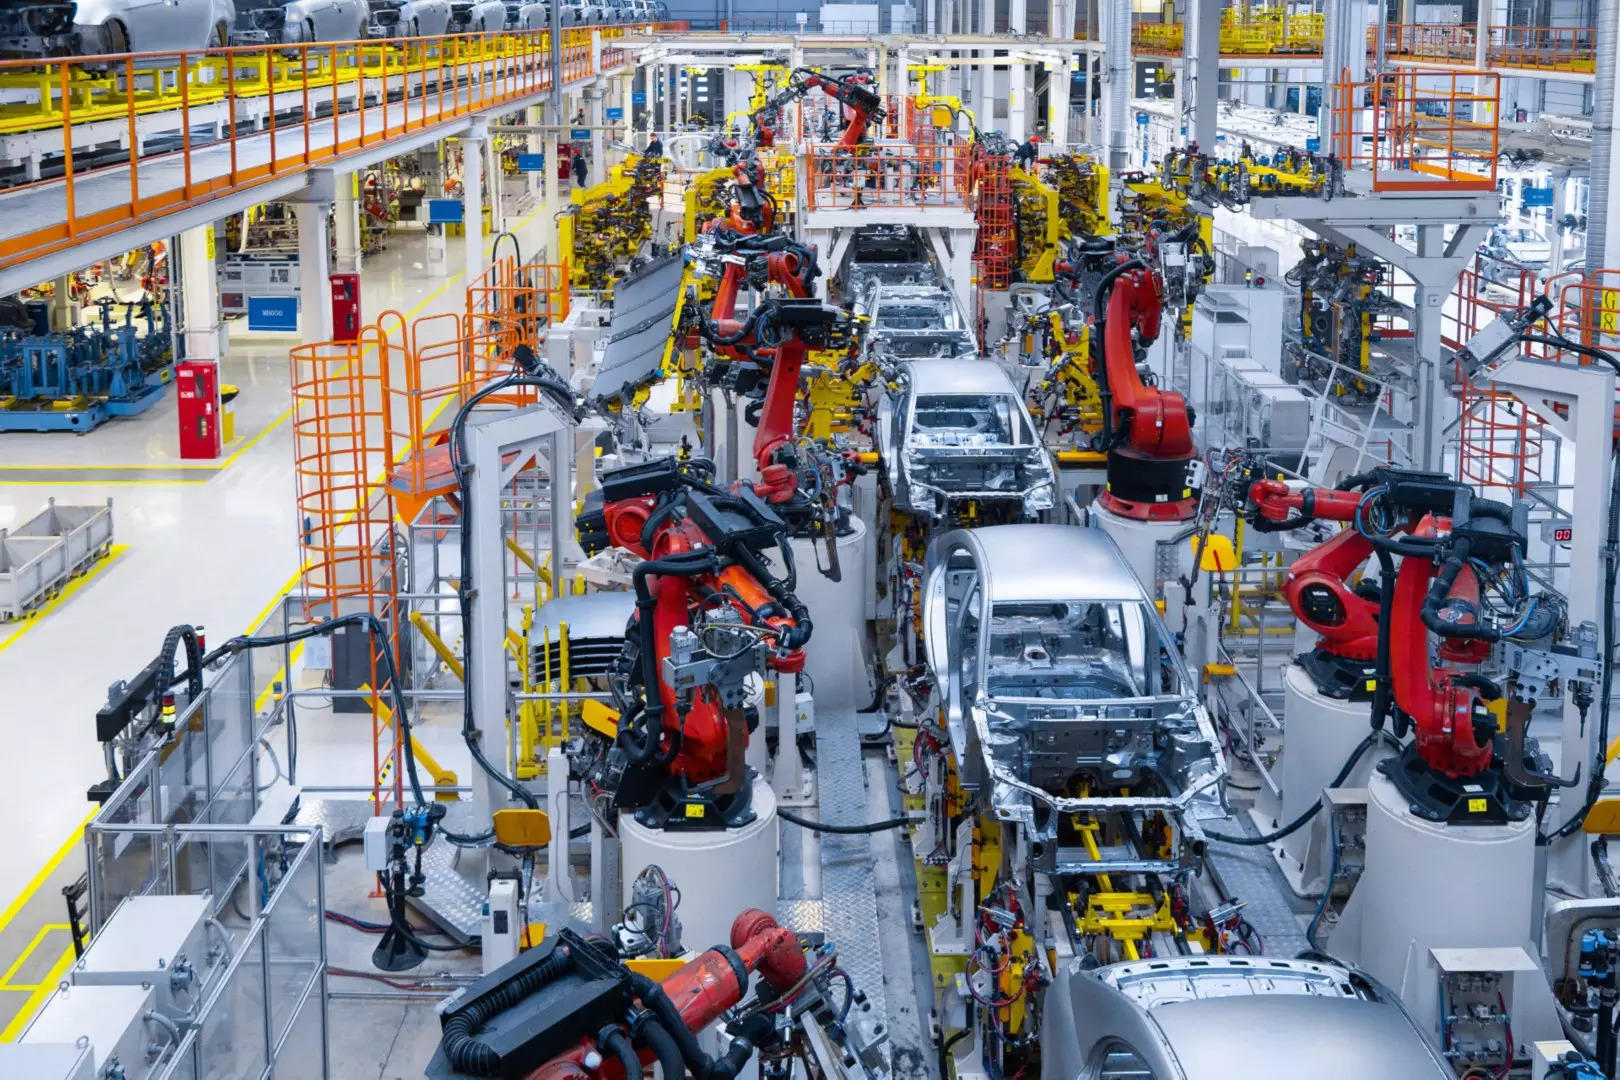 Japan's automakers - which account for 15% of the industrial output statistics, according to METI - including Toyota Motor Corp and Honda Motor Co announced earlier this month their plans to return to normal production in December and make up lost output over coming months.